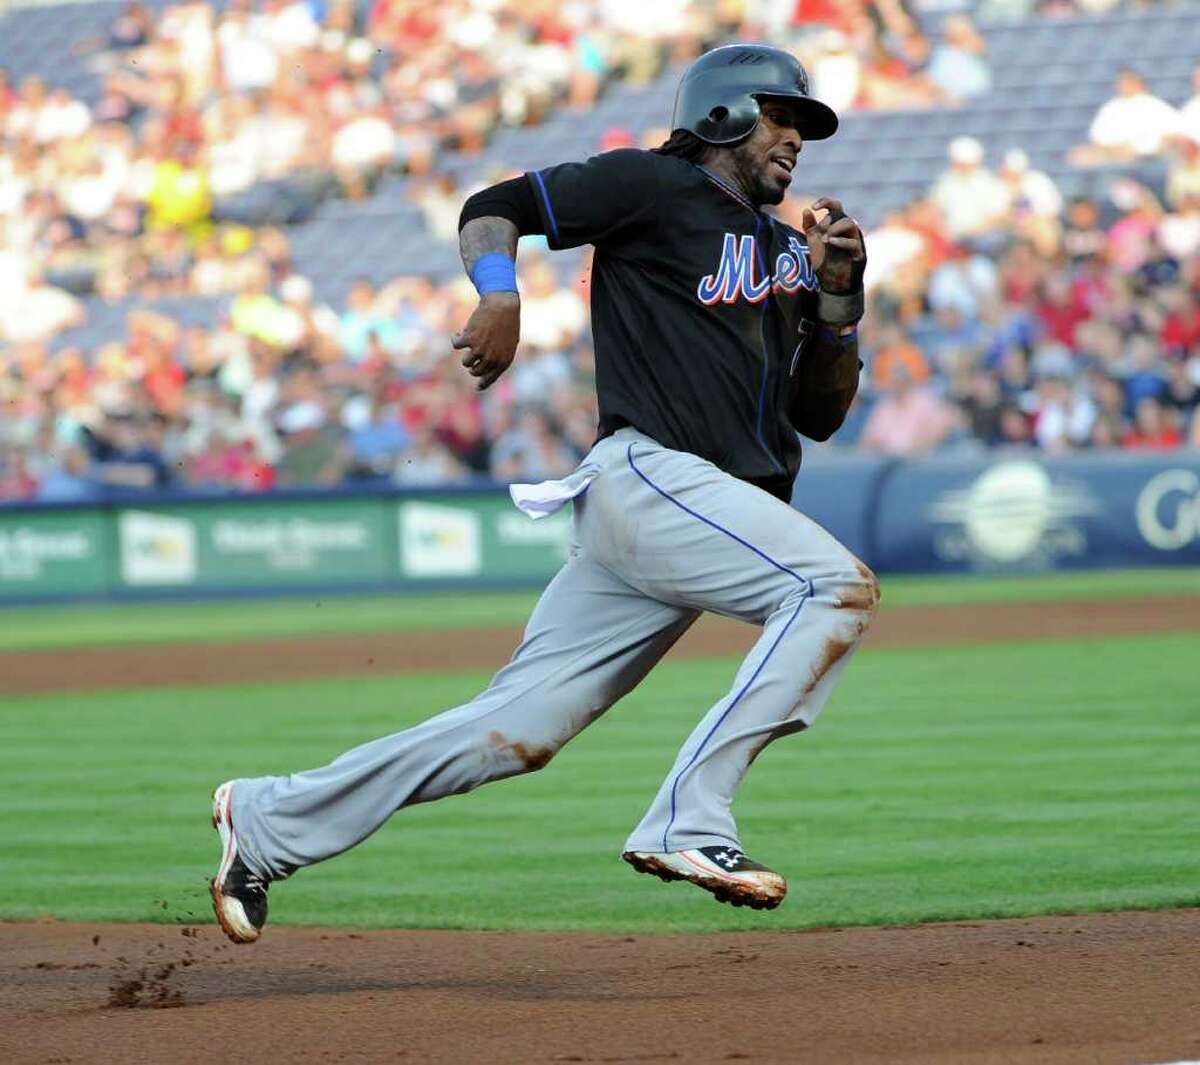 New York Mets' Jose Reyes rounds third base on his way to score on a single to centerfield by Carlos Beltran against the Atlanta Braves during the first inning of a baseball game, June 14, 2011, in Atlanta. (AP Photo/John Amis)